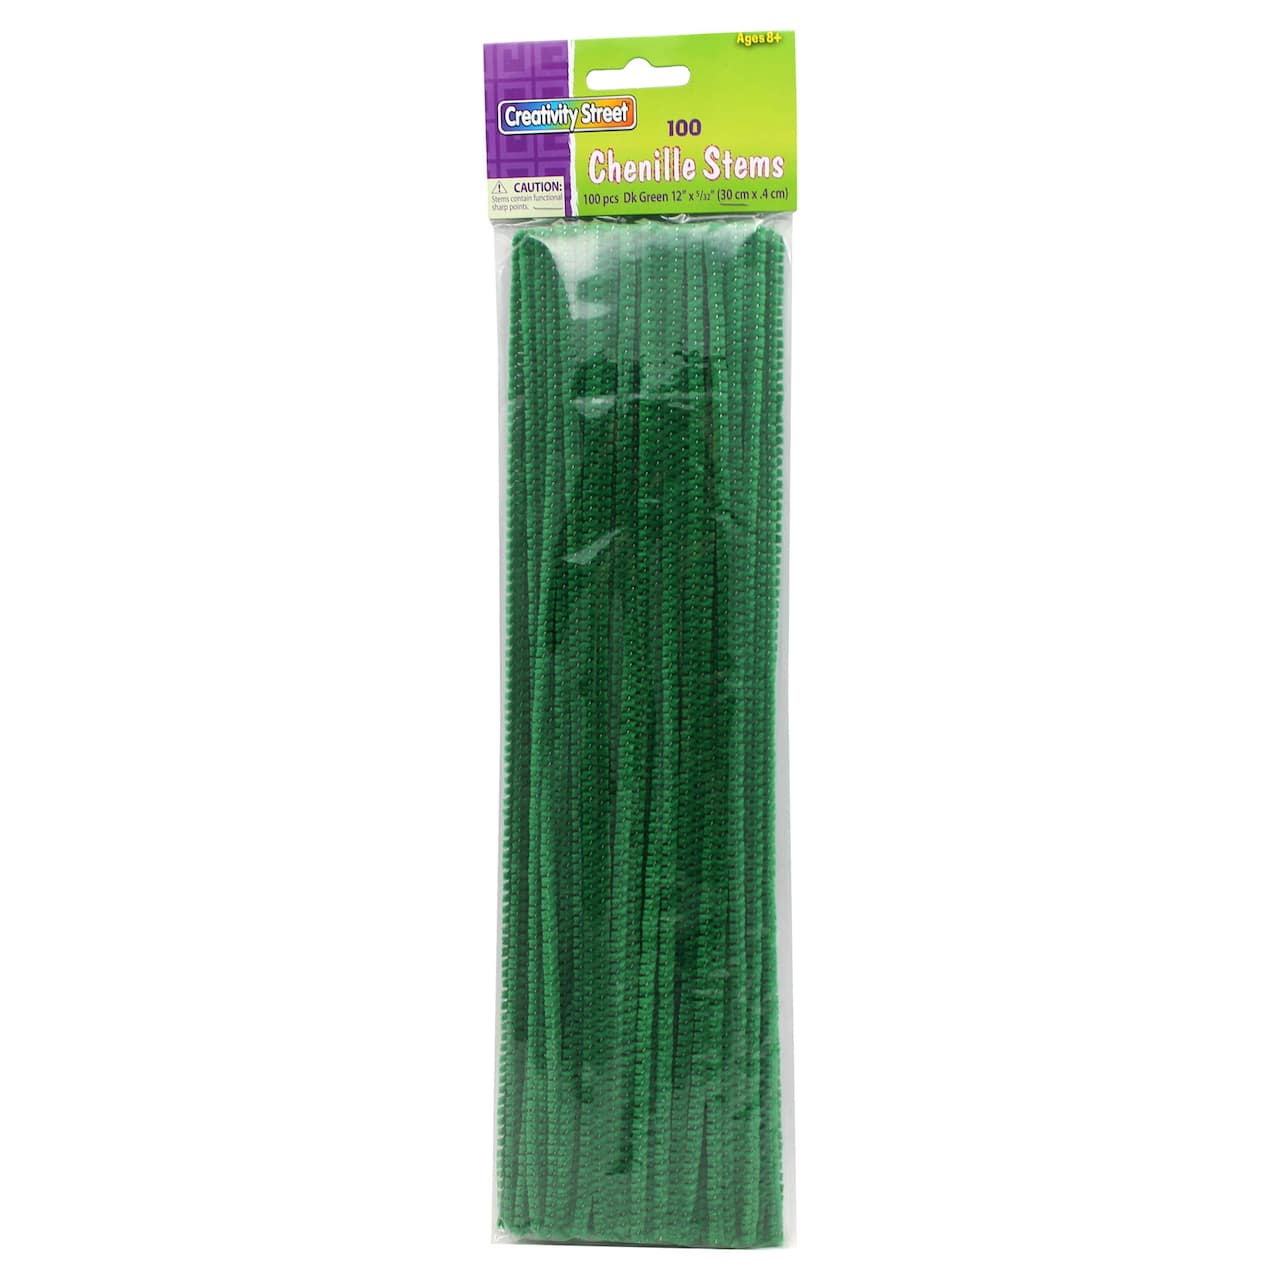 6 Packs: 12 Packs 100 ct. (7,200 total) 12 Green Chenille Pipe Cleaners